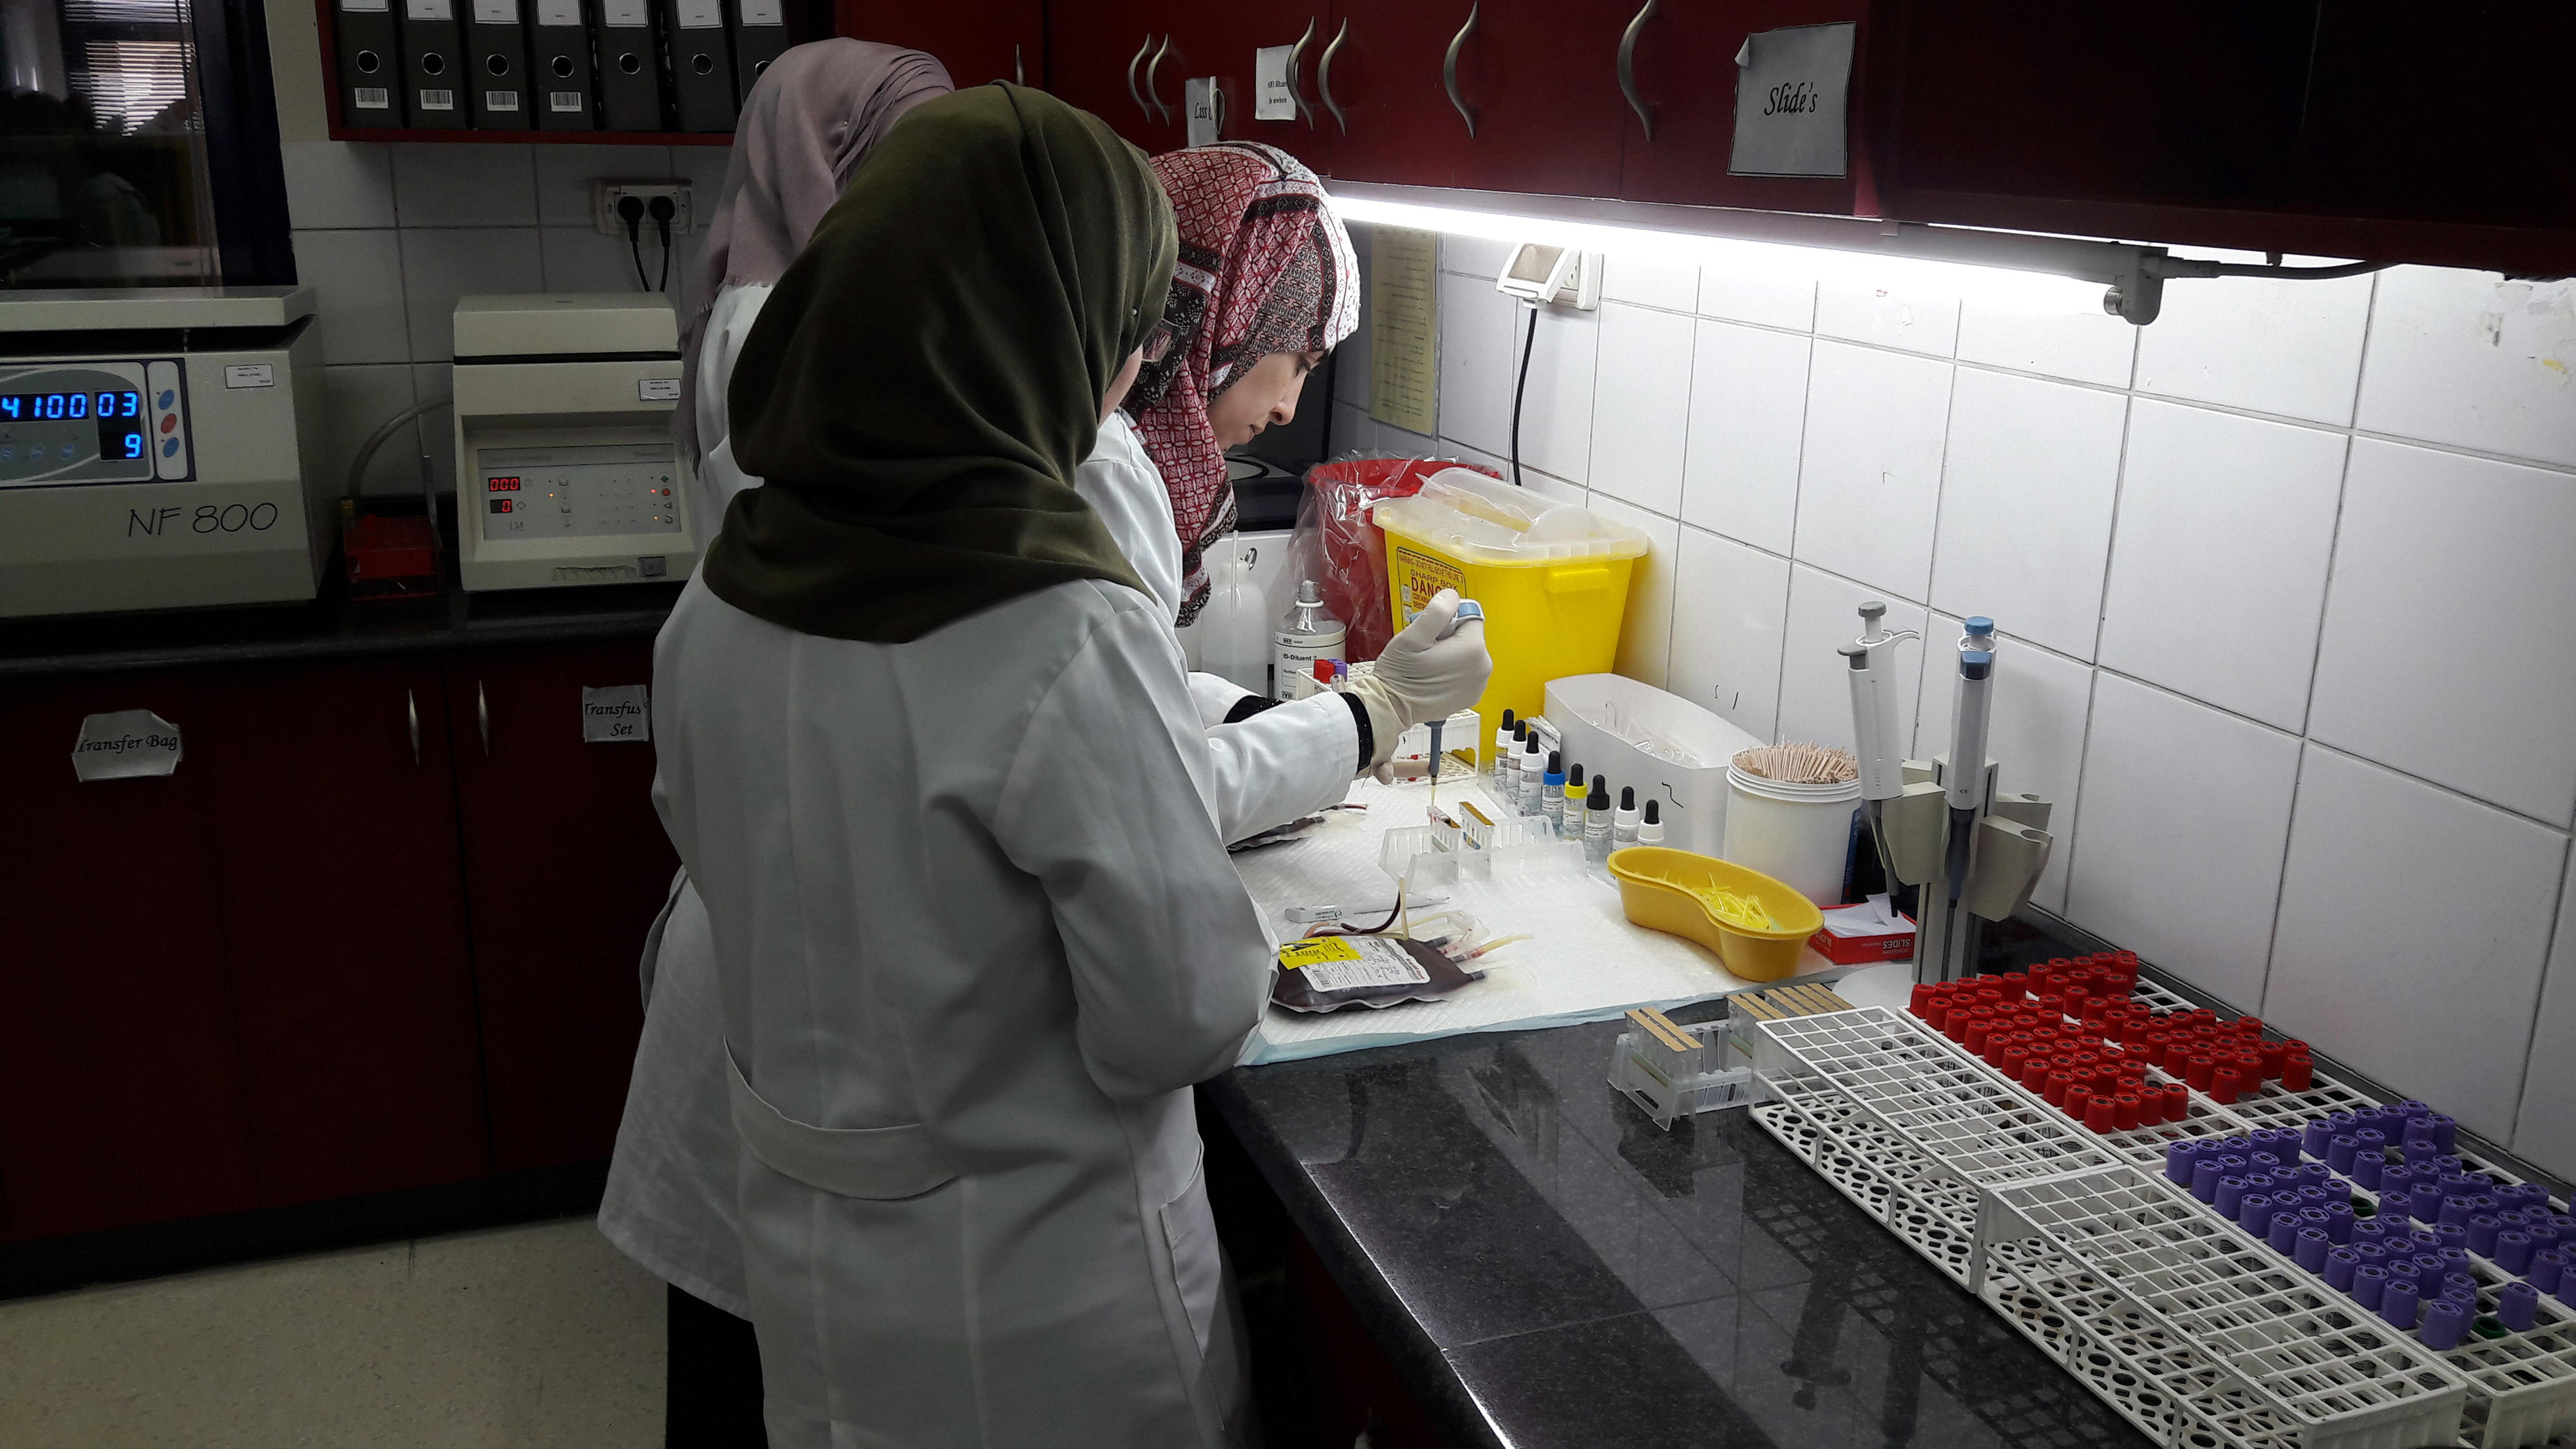 Blood examination by employees of the national blood bank in Ramallah, with which the German National Metrology Institute cooperates as part of a project to support the national quality infrastructure.